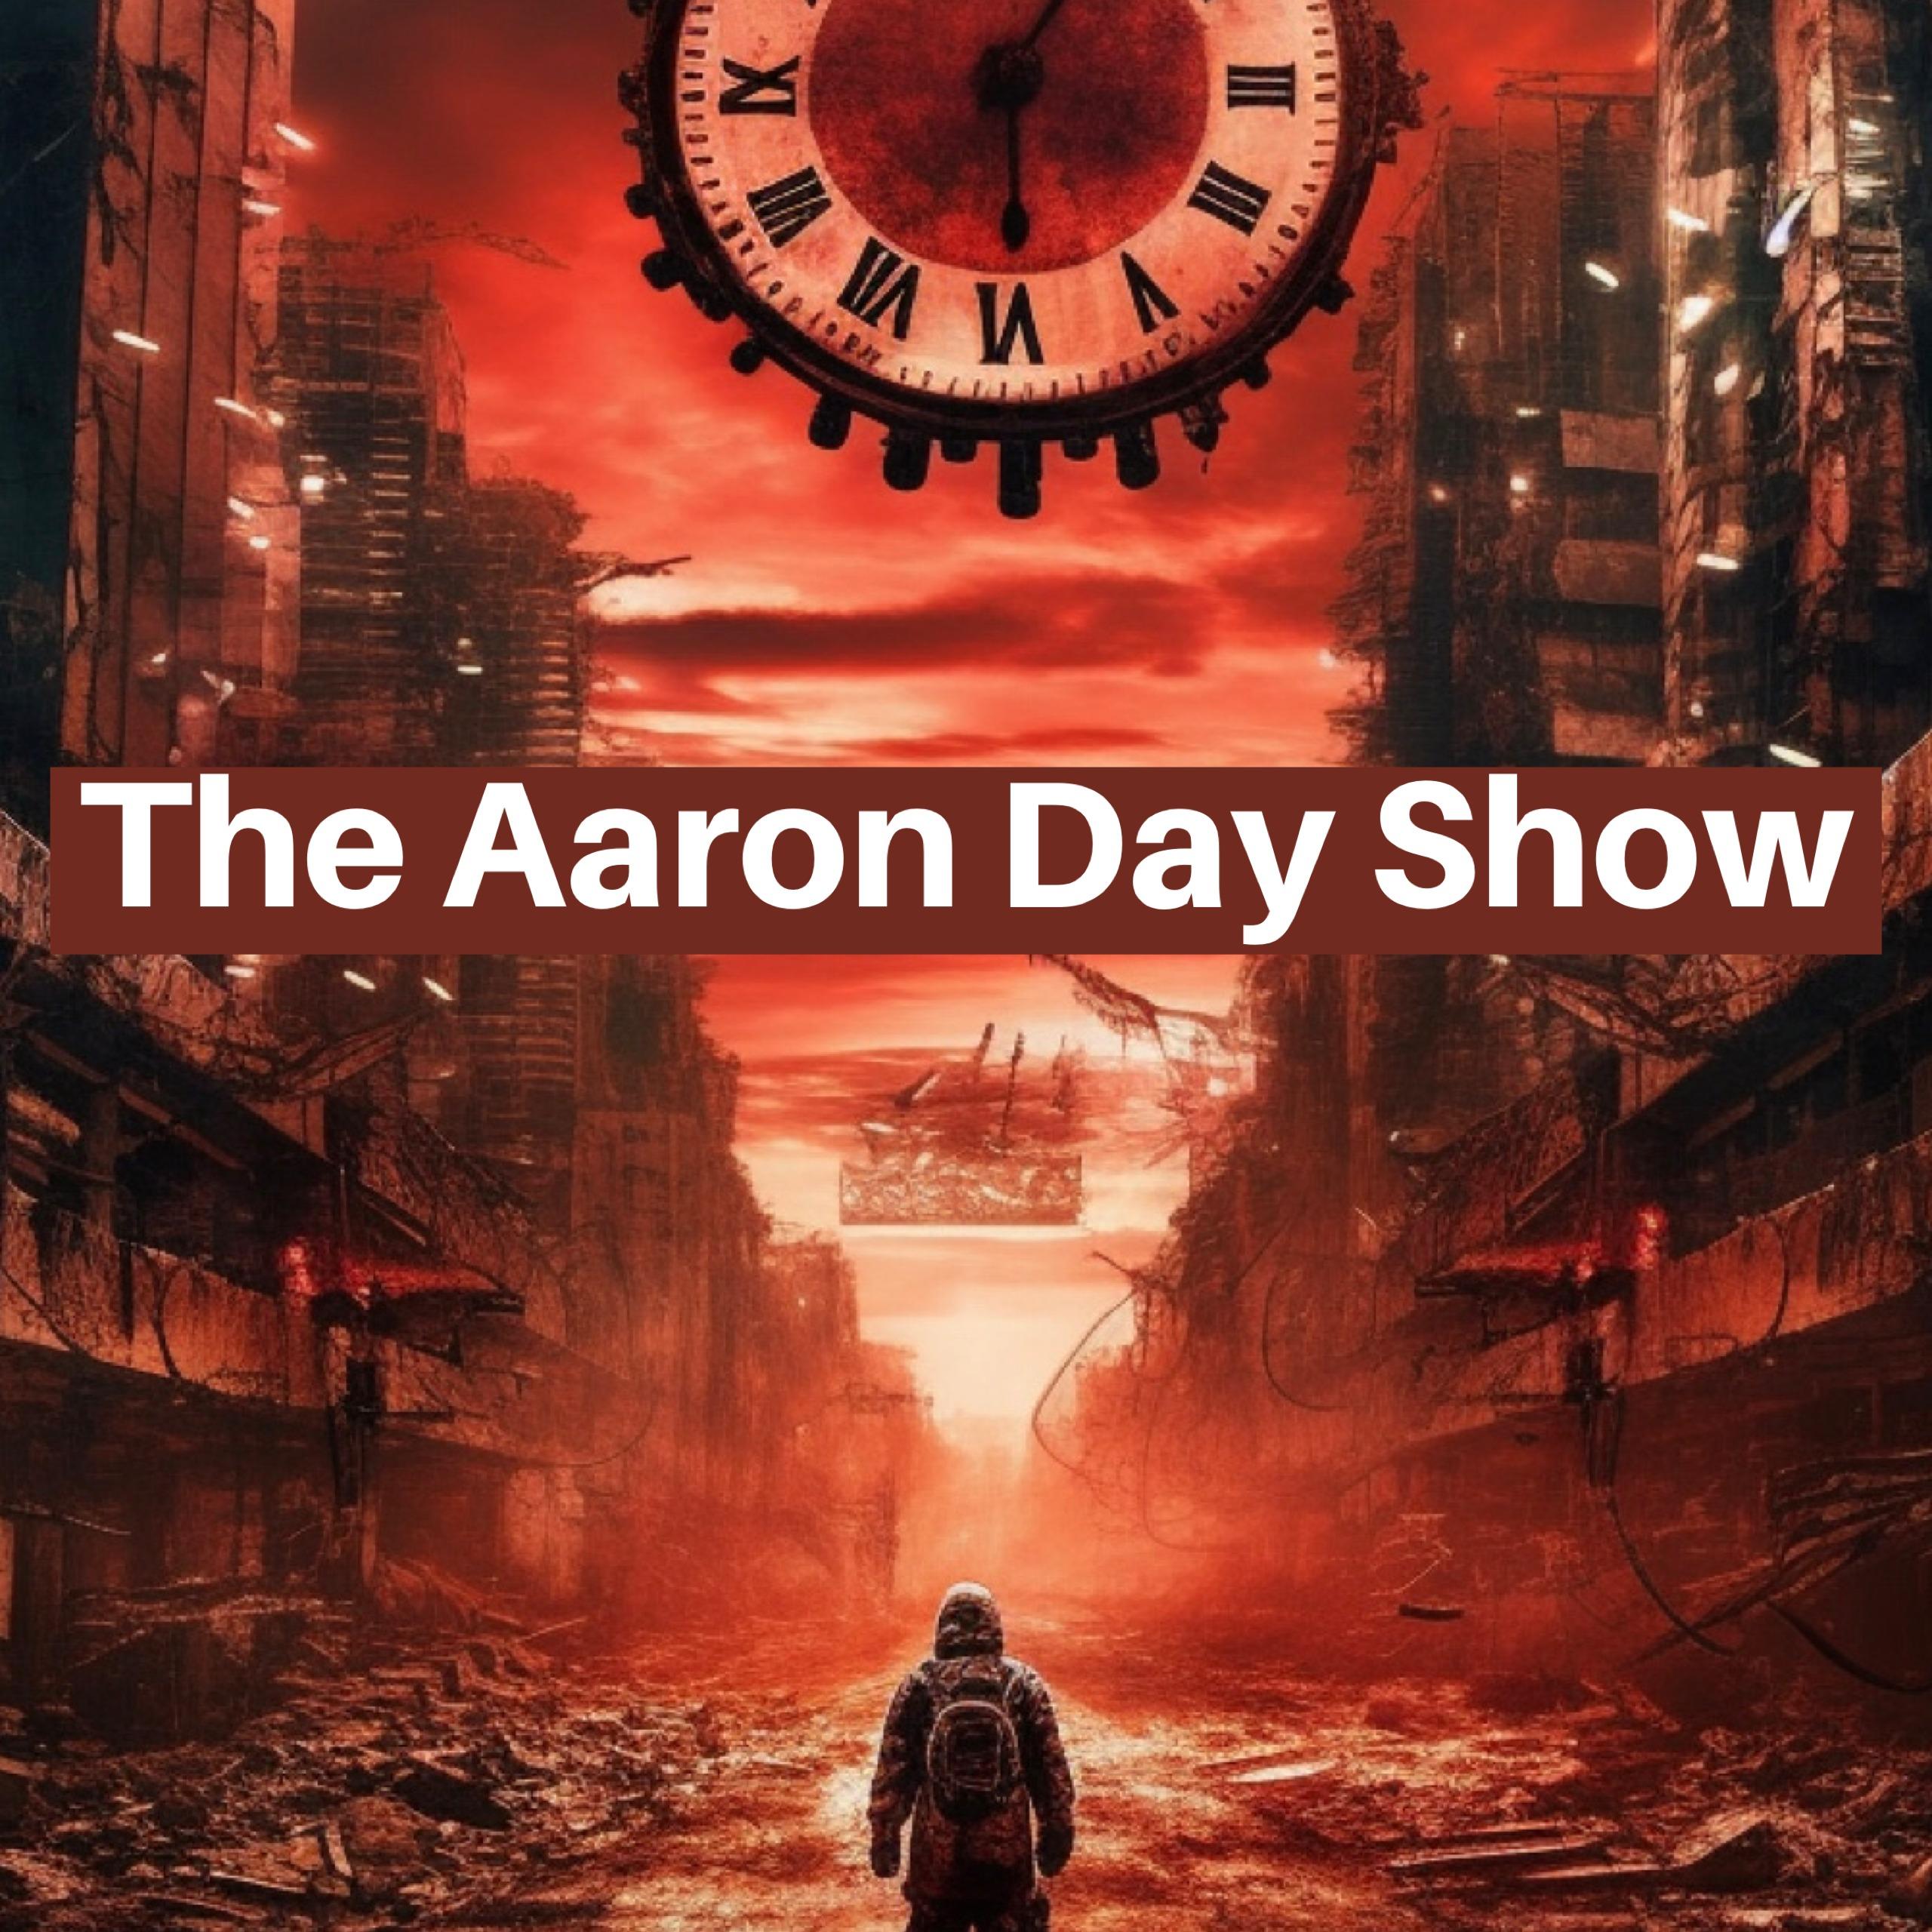 The Aaron Day Show